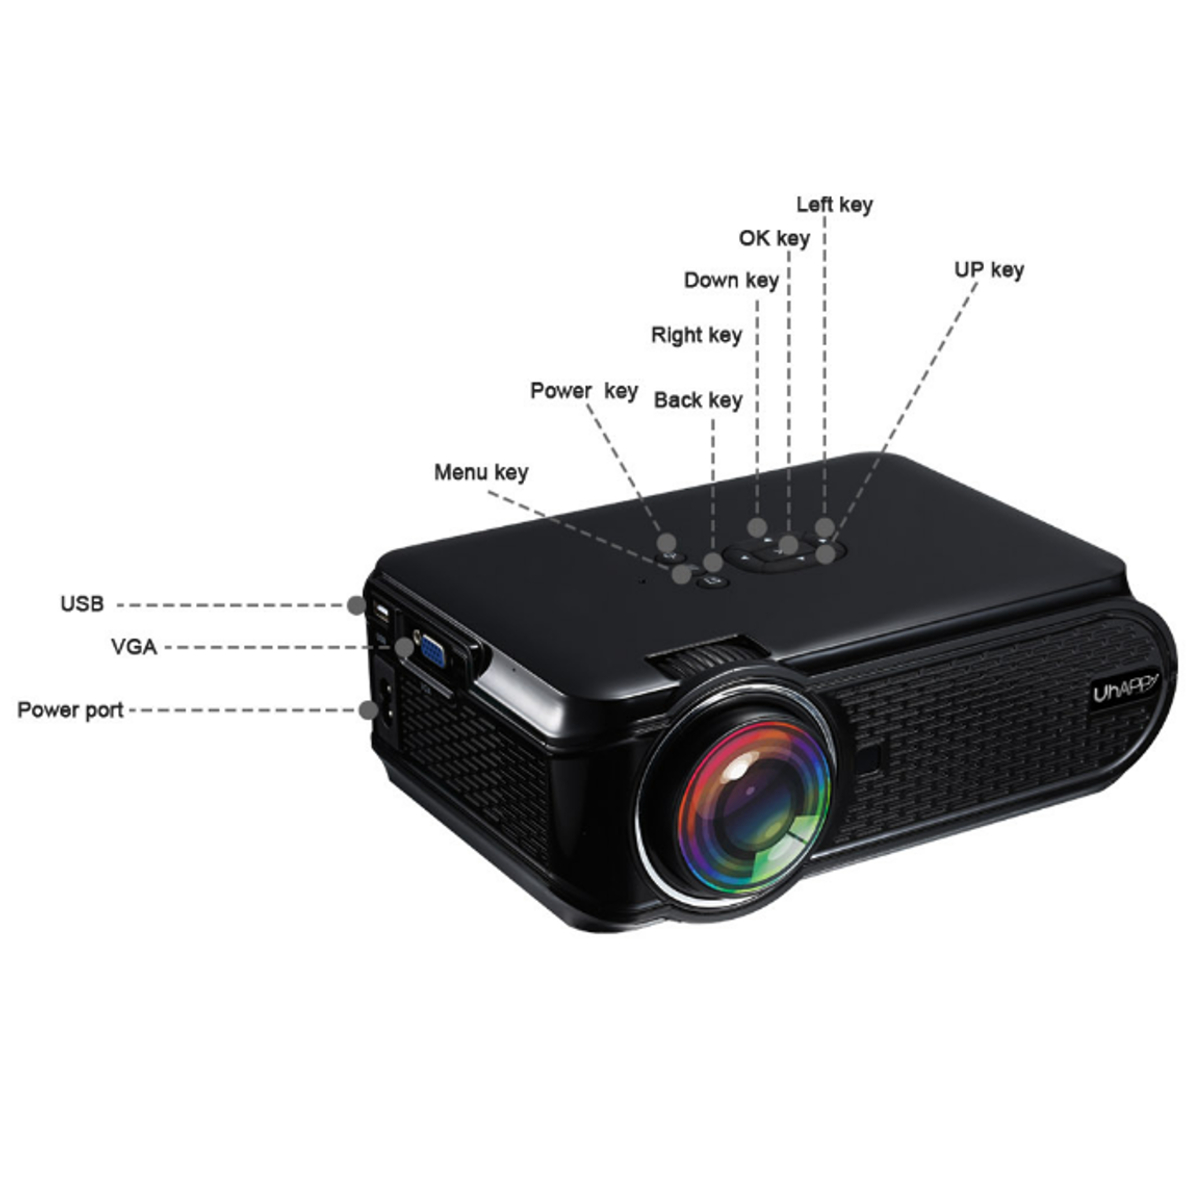 UHAPPY U90 Black Android 6.0 2000 Lumens LED WiFi bluetooth 4.0 Projector 800 x 480 Support 1080p 23